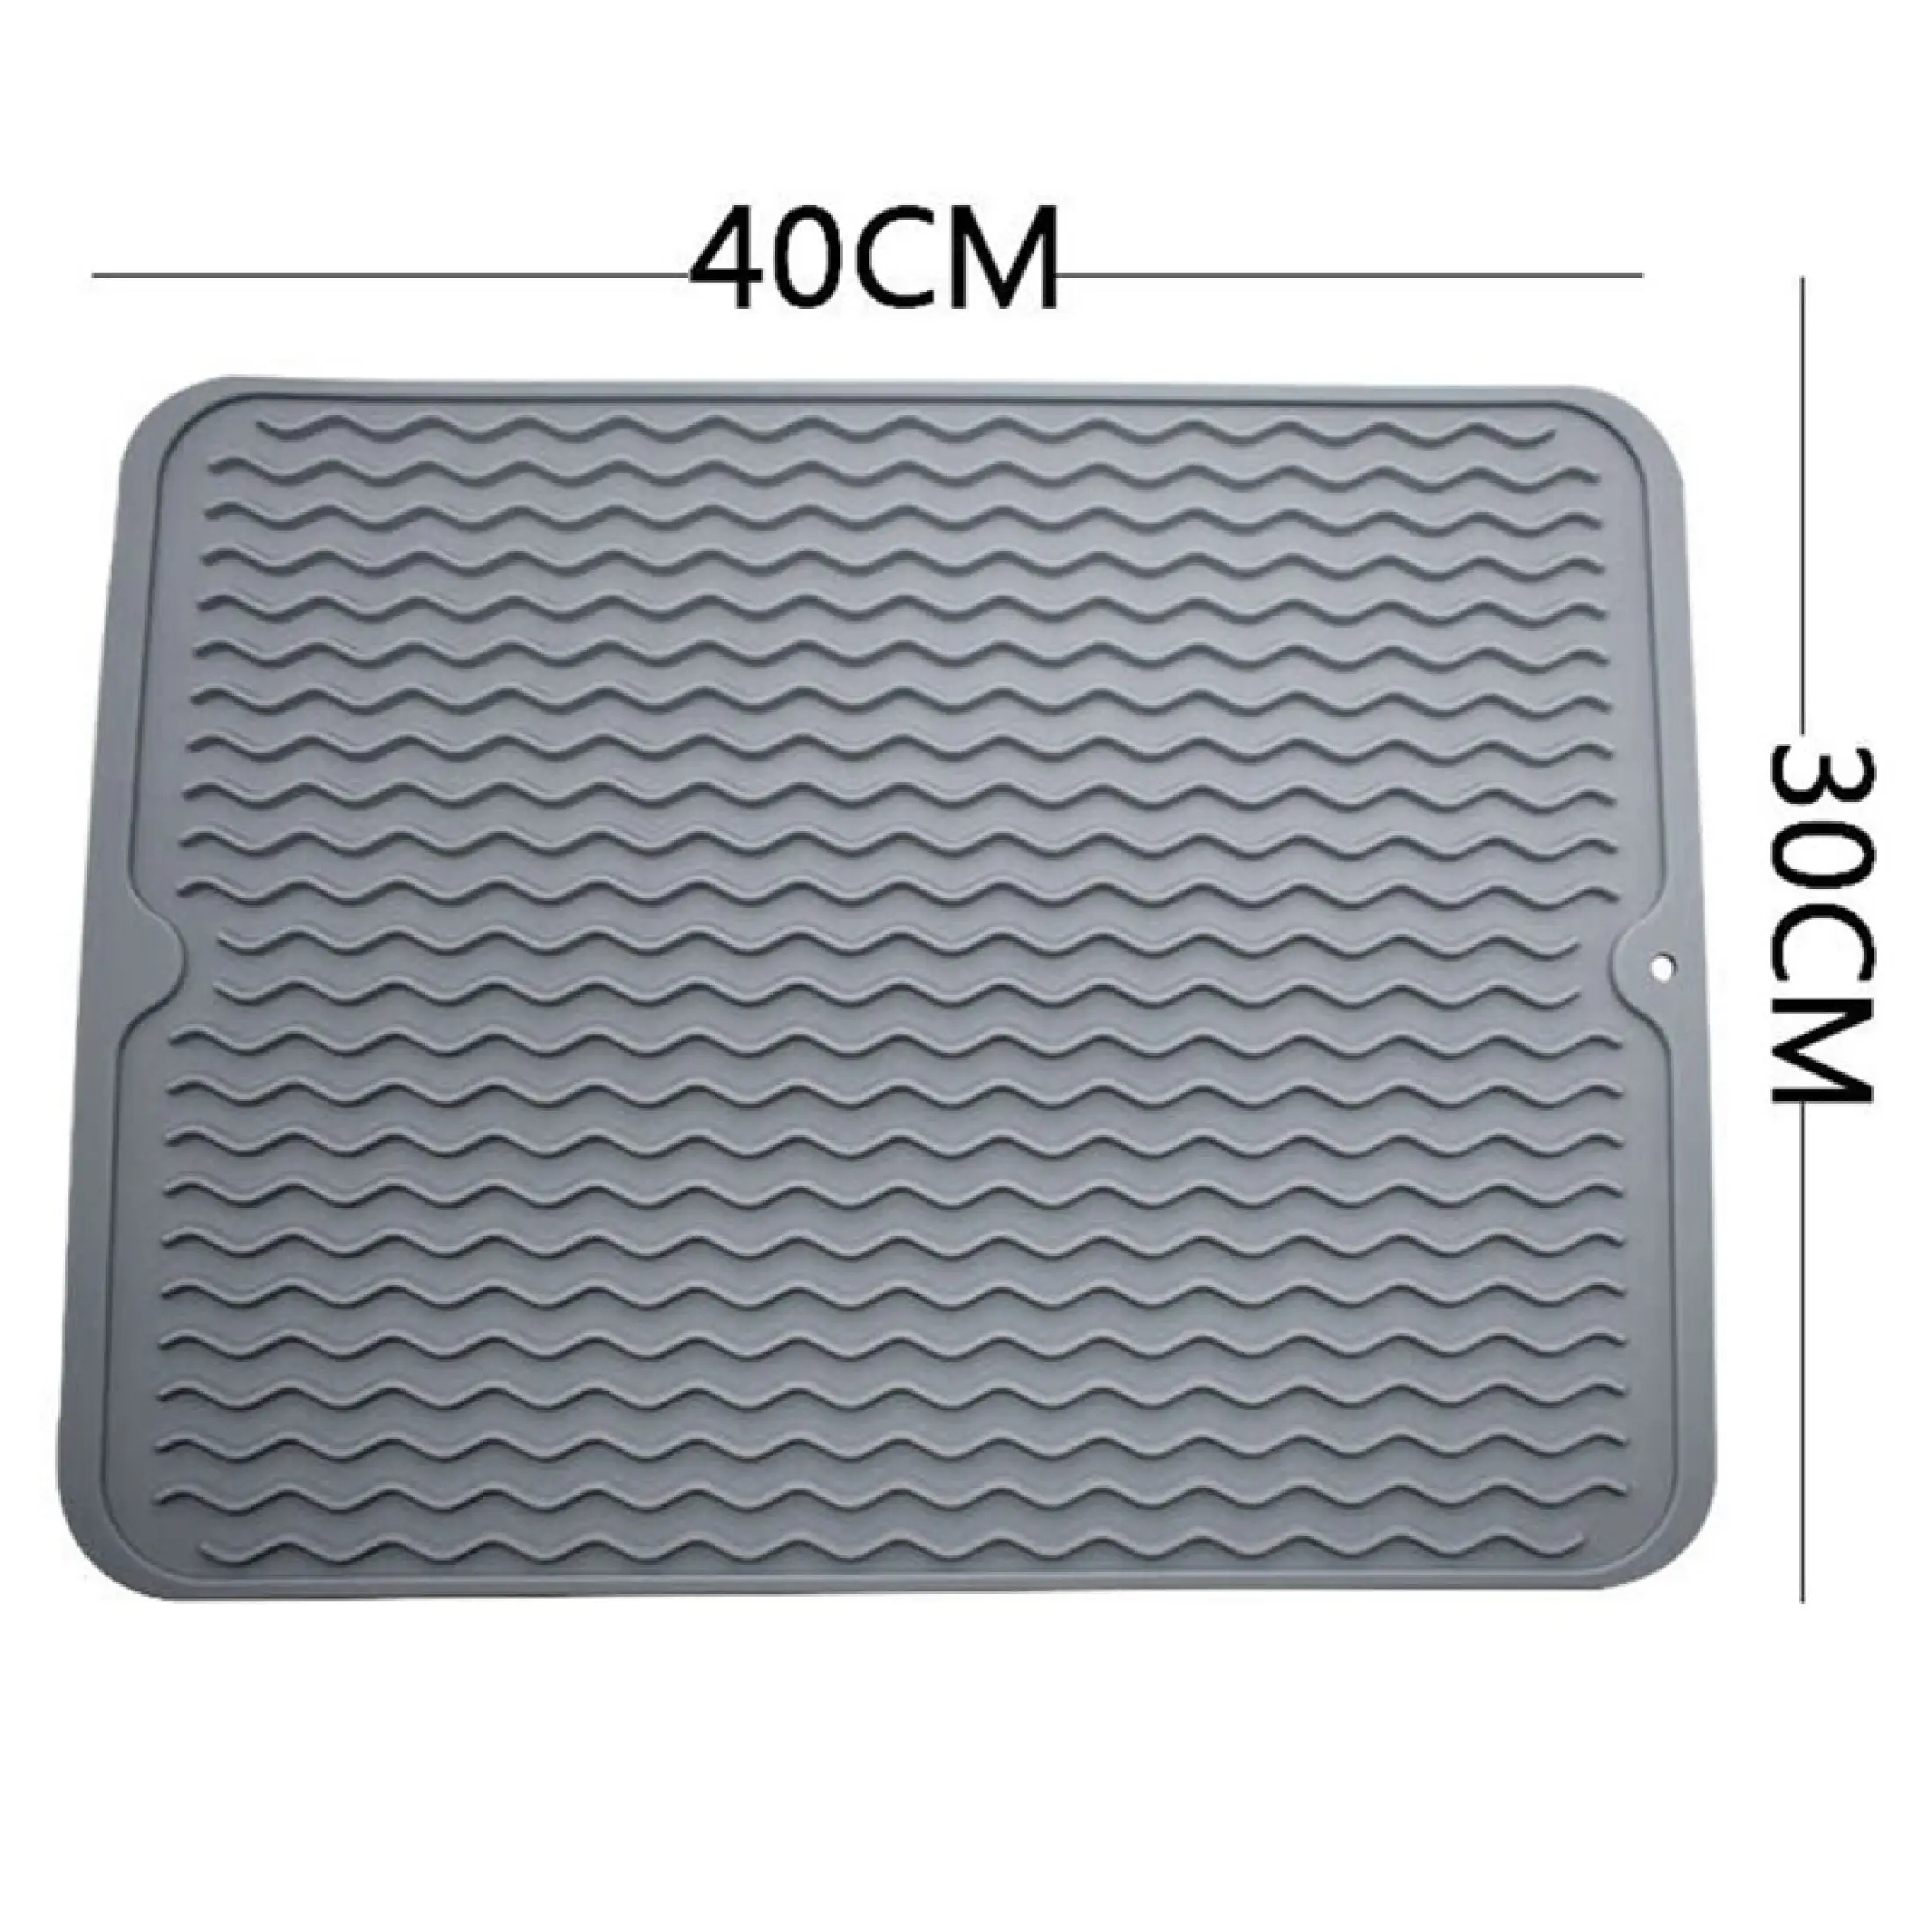 SINK MAT Soft Rubber Multifunctional Kitchen Heat Insulation Drying Protector